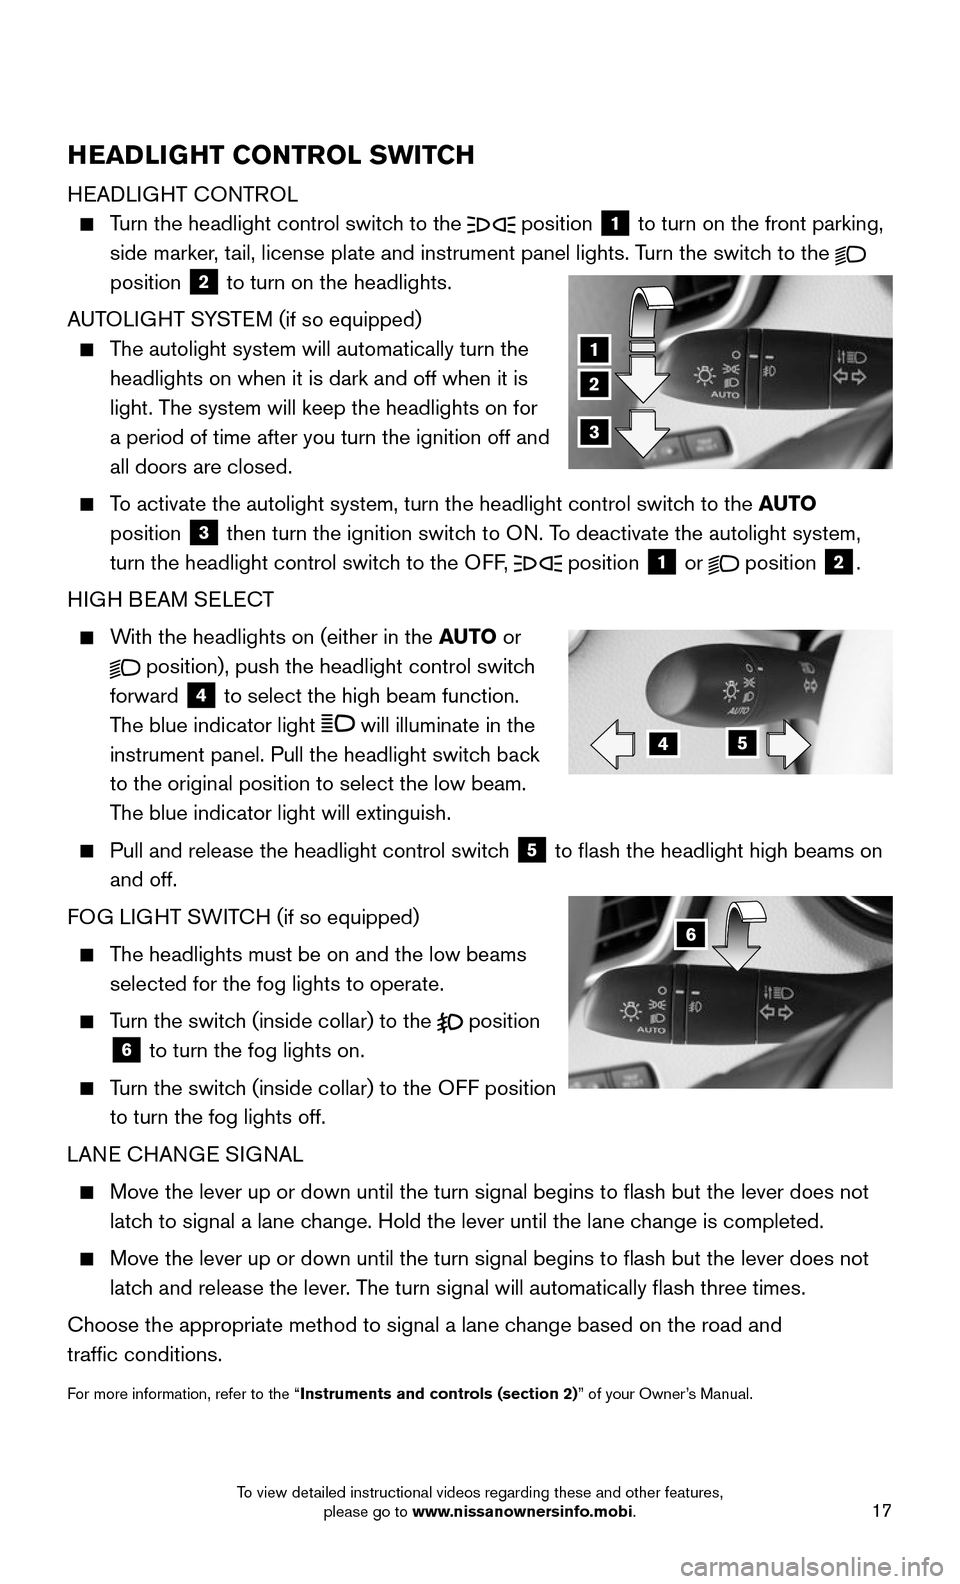 NISSAN ROGUE 2016 2.G Quick Reference Guide 17
HEADLIGHT CONTROL SWITCH
HEADLIGHT CONTROL 
    Turn the headlight control switch to the  position 1 to turn on the front parking, 
side marker, tail, license plate and instrument panel lights. Tur